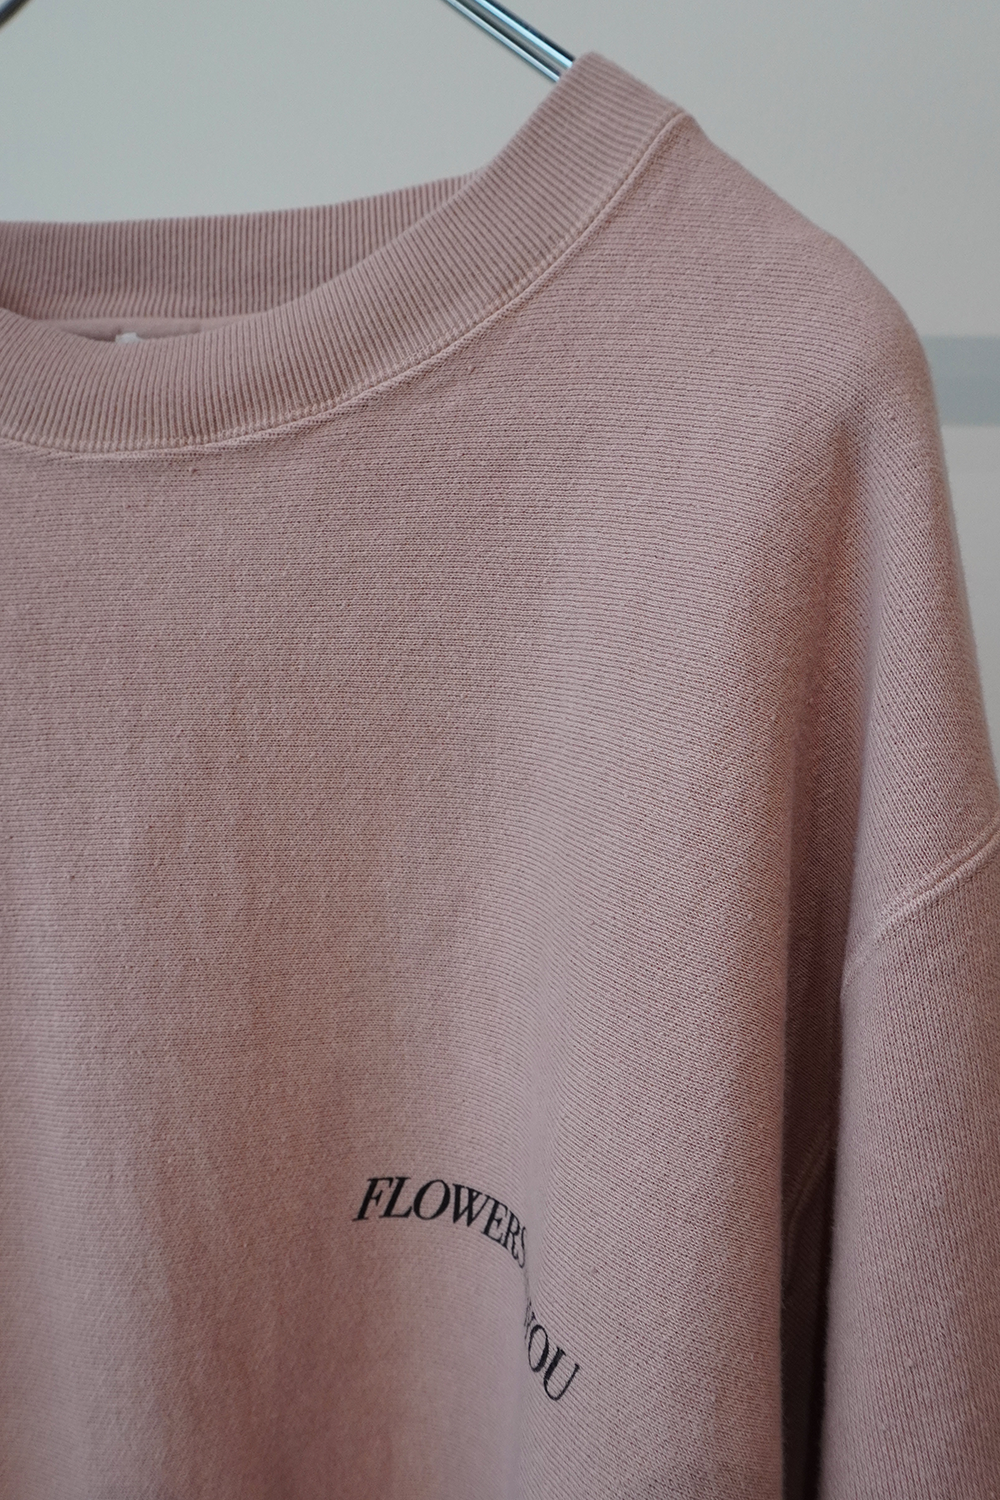 Over dyed Sweat Shirt "FLOWERS"(Beige)